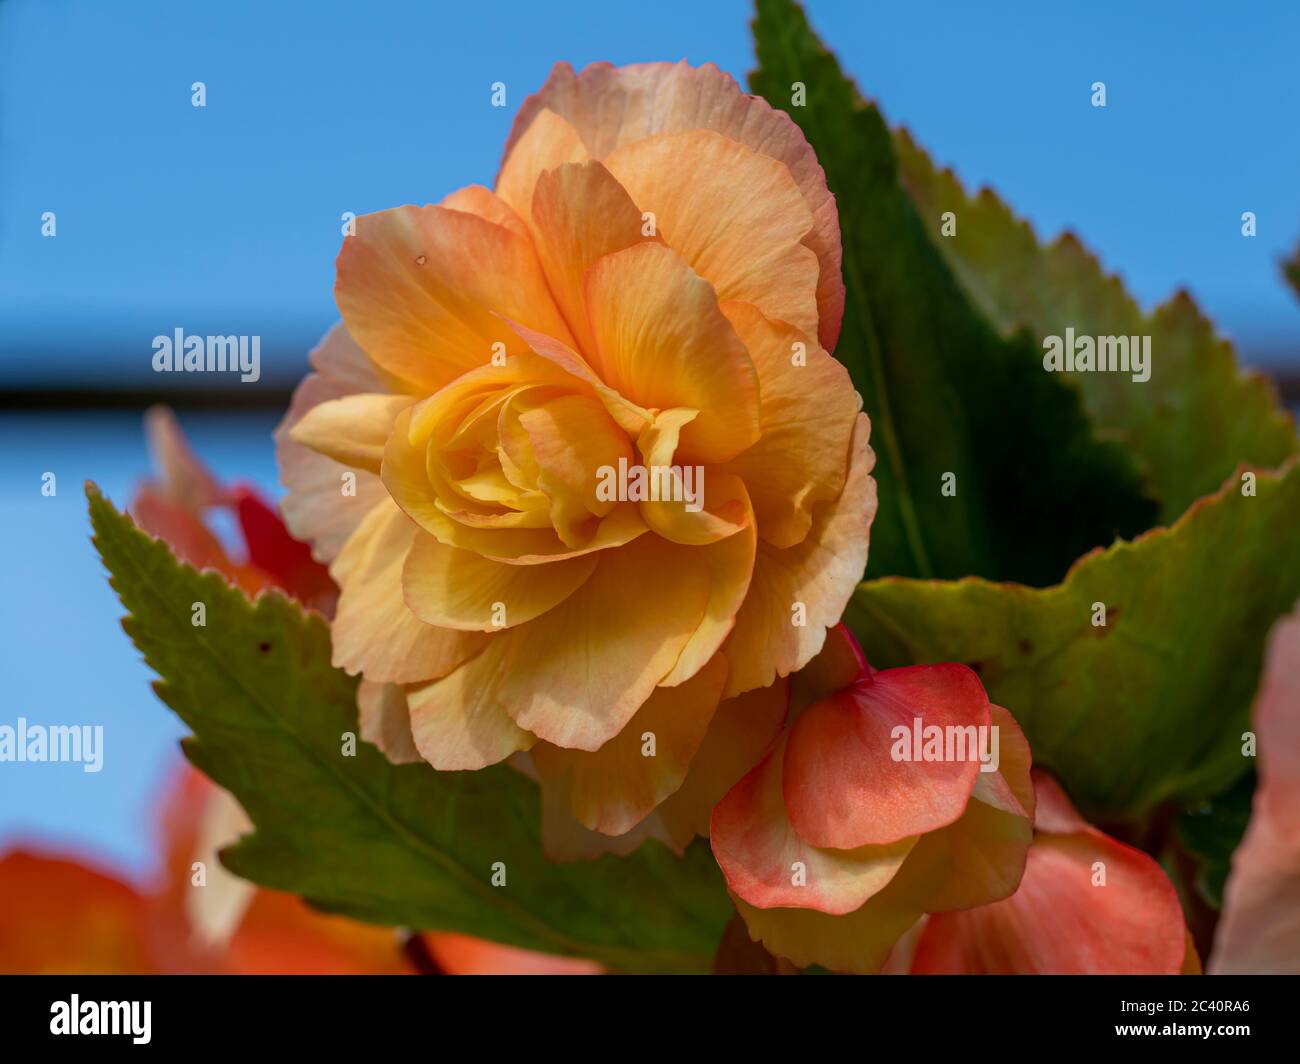 Pretty peach coloured double Begonia flowering inside a conservatory with a blue sky background Stock Photo